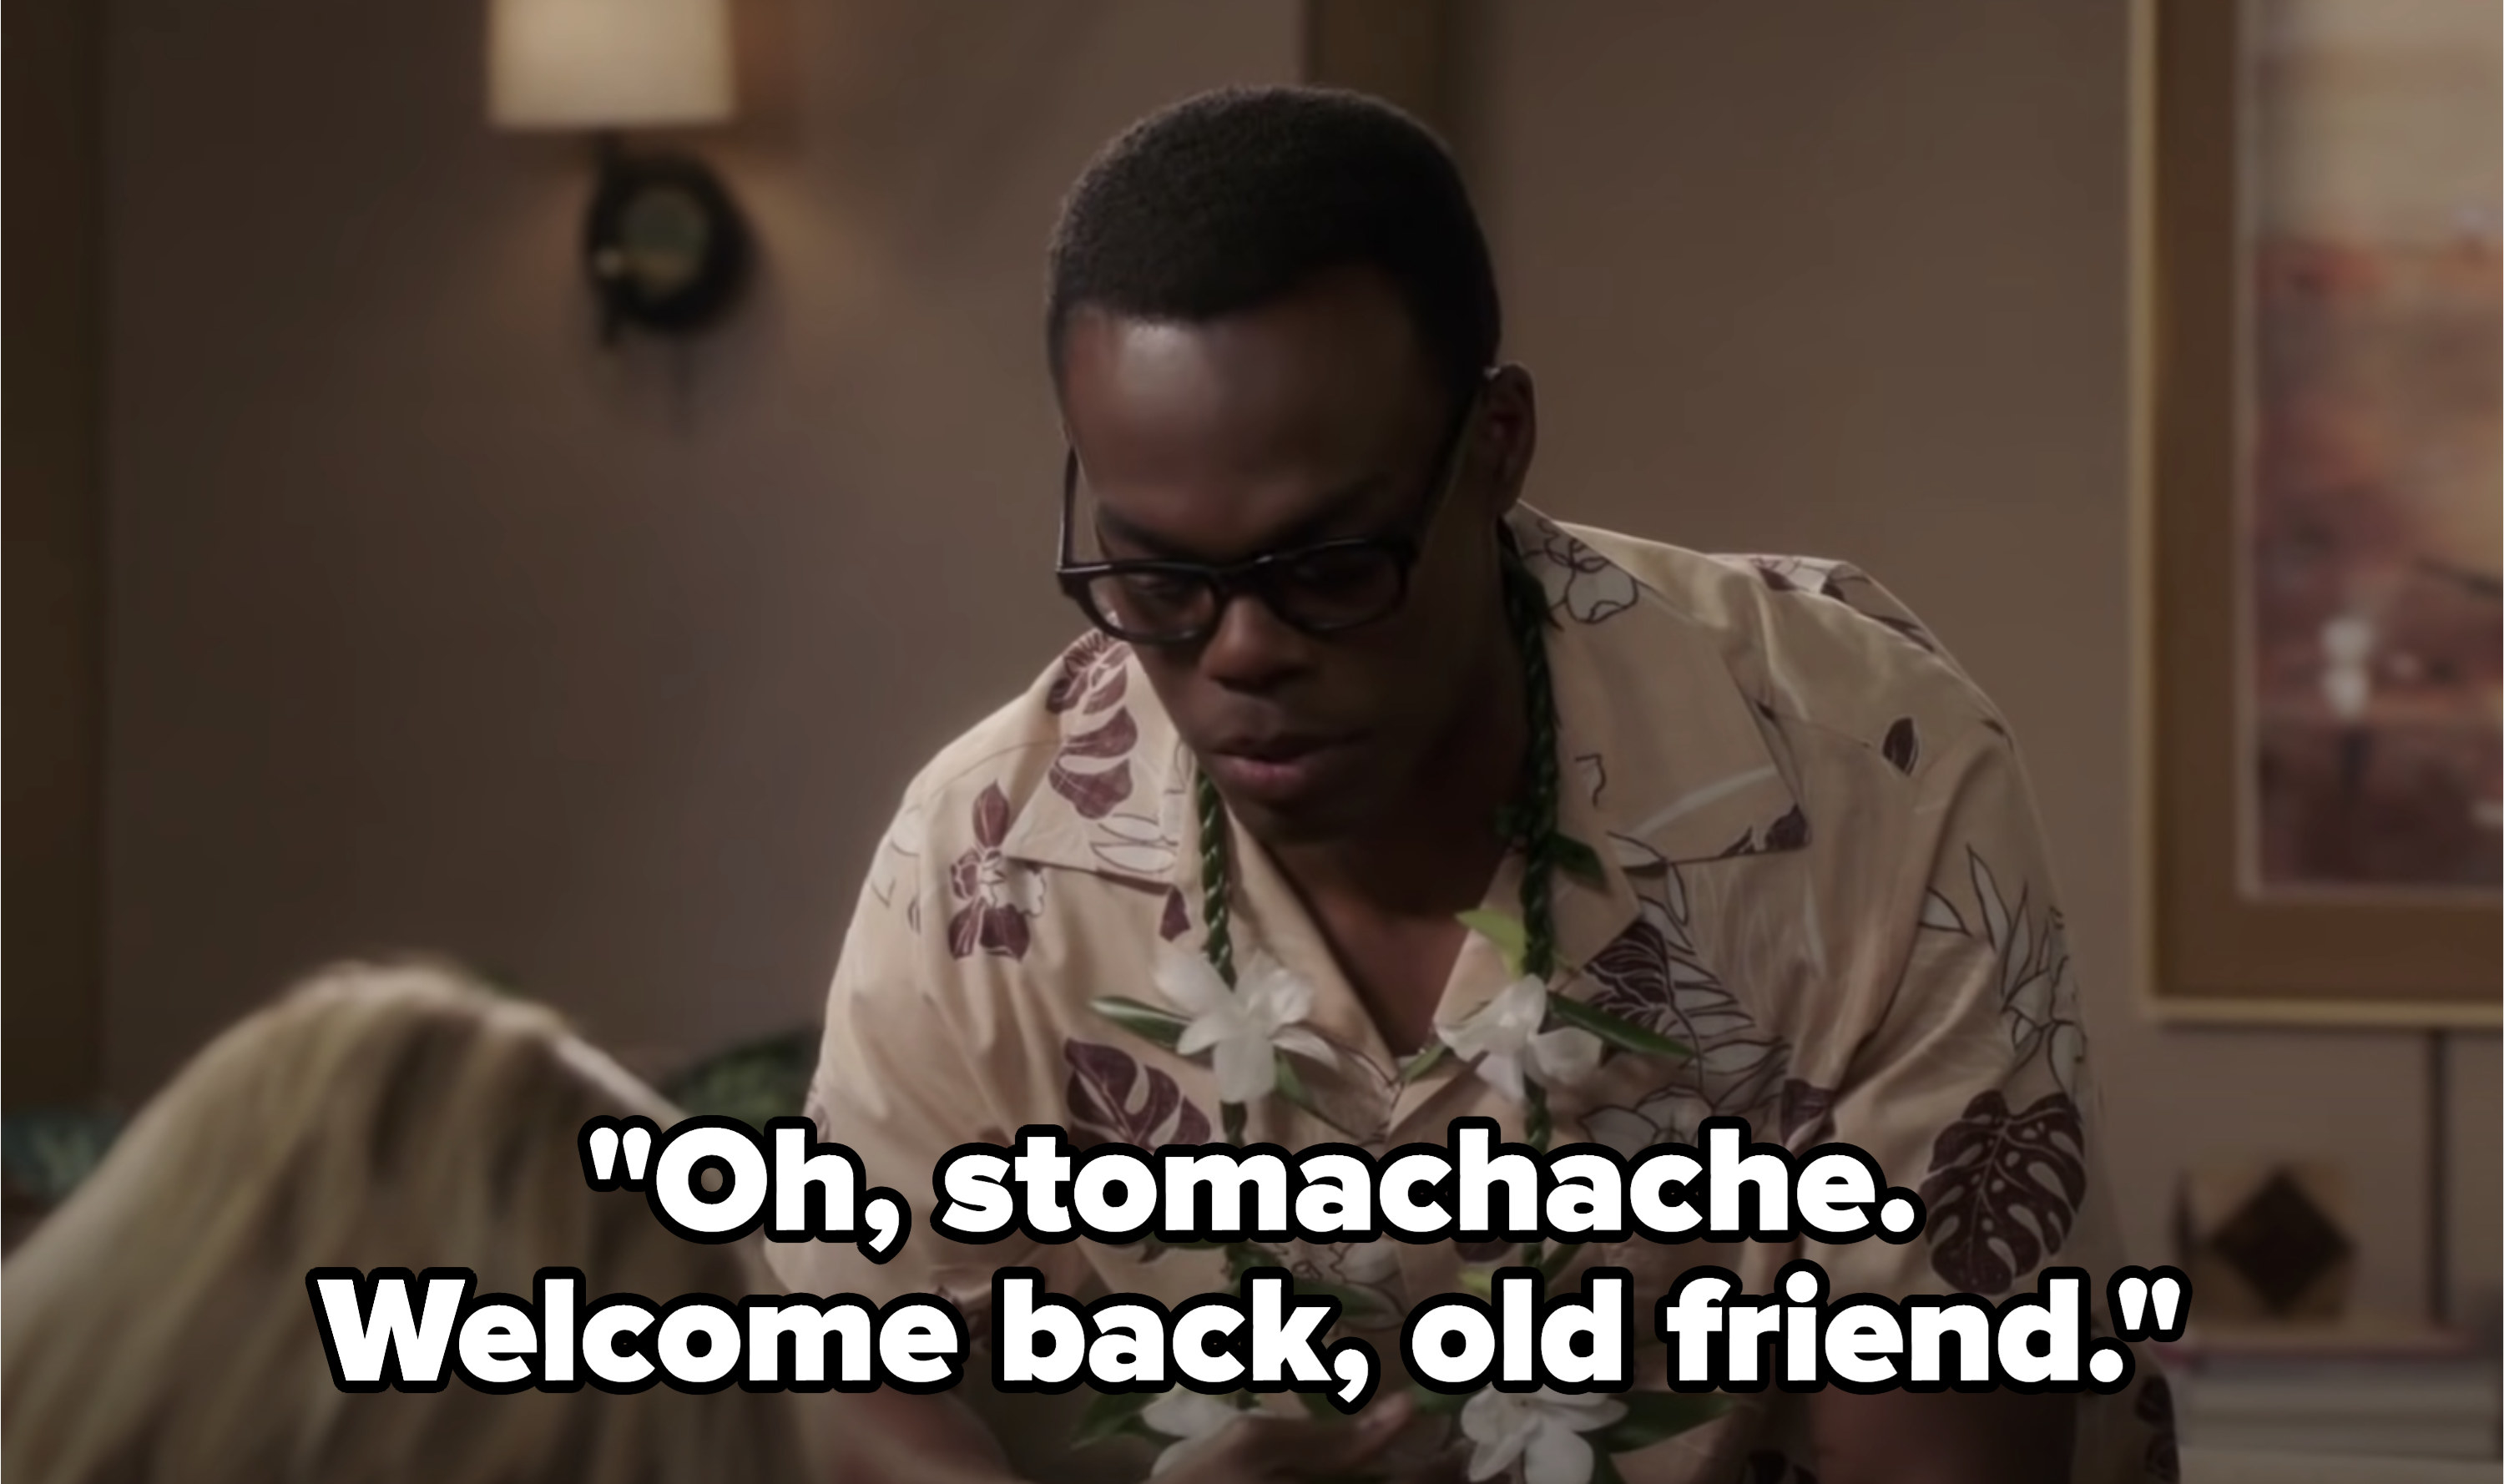 &quot;oh, stomachache, welcome back, old friend&quot;